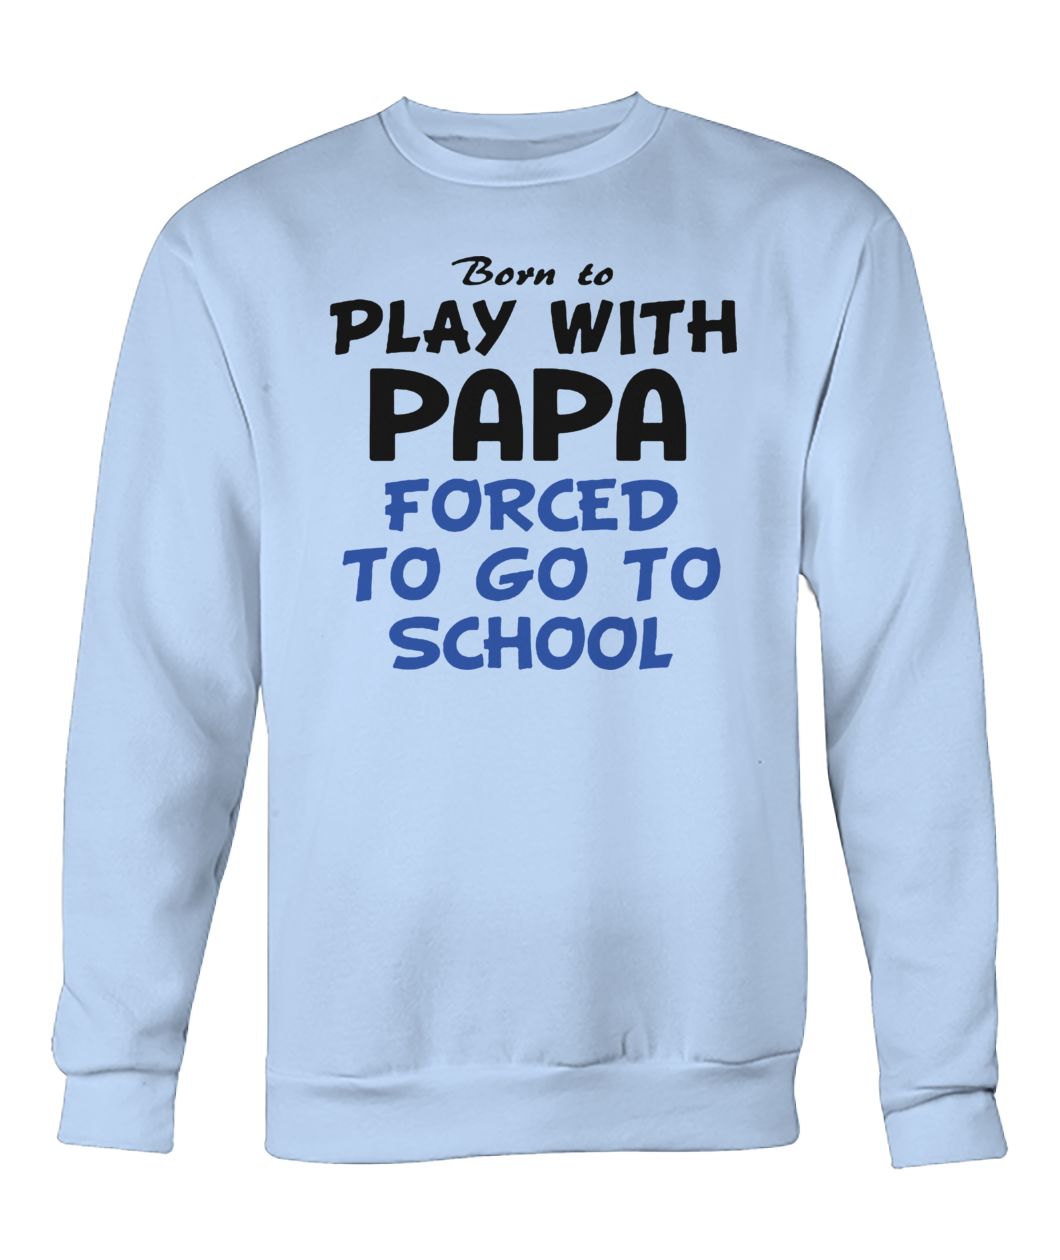 Born to play with papa forced to go to school crew neck sweatshirt